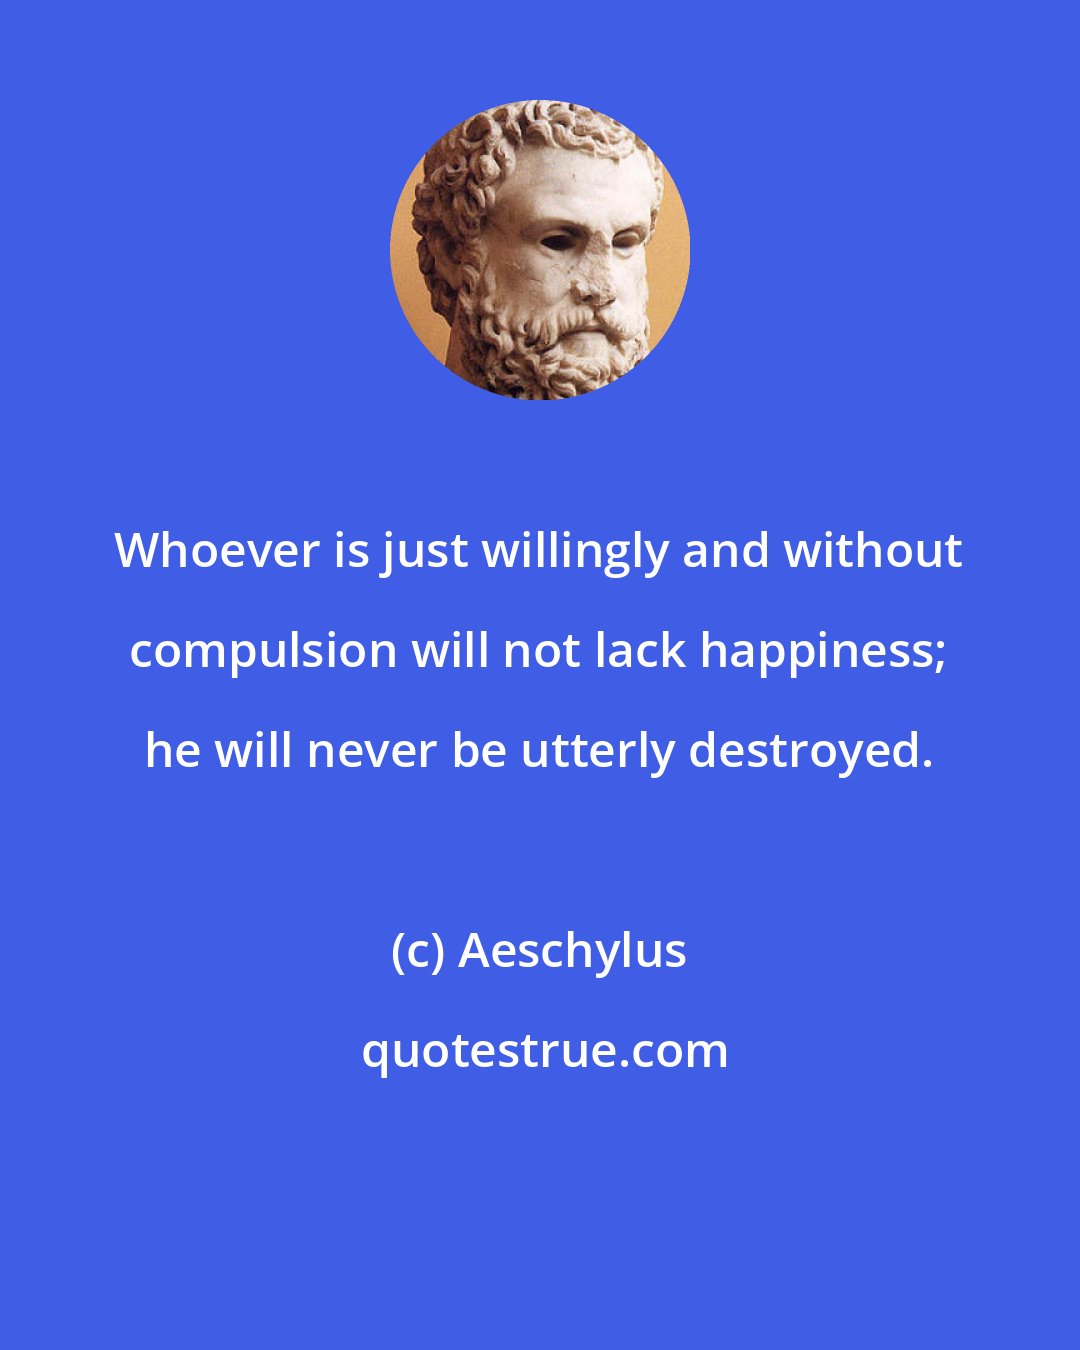 Aeschylus: Whoever is just willingly and without compulsion will not lack happiness; he will never be utterly destroyed.